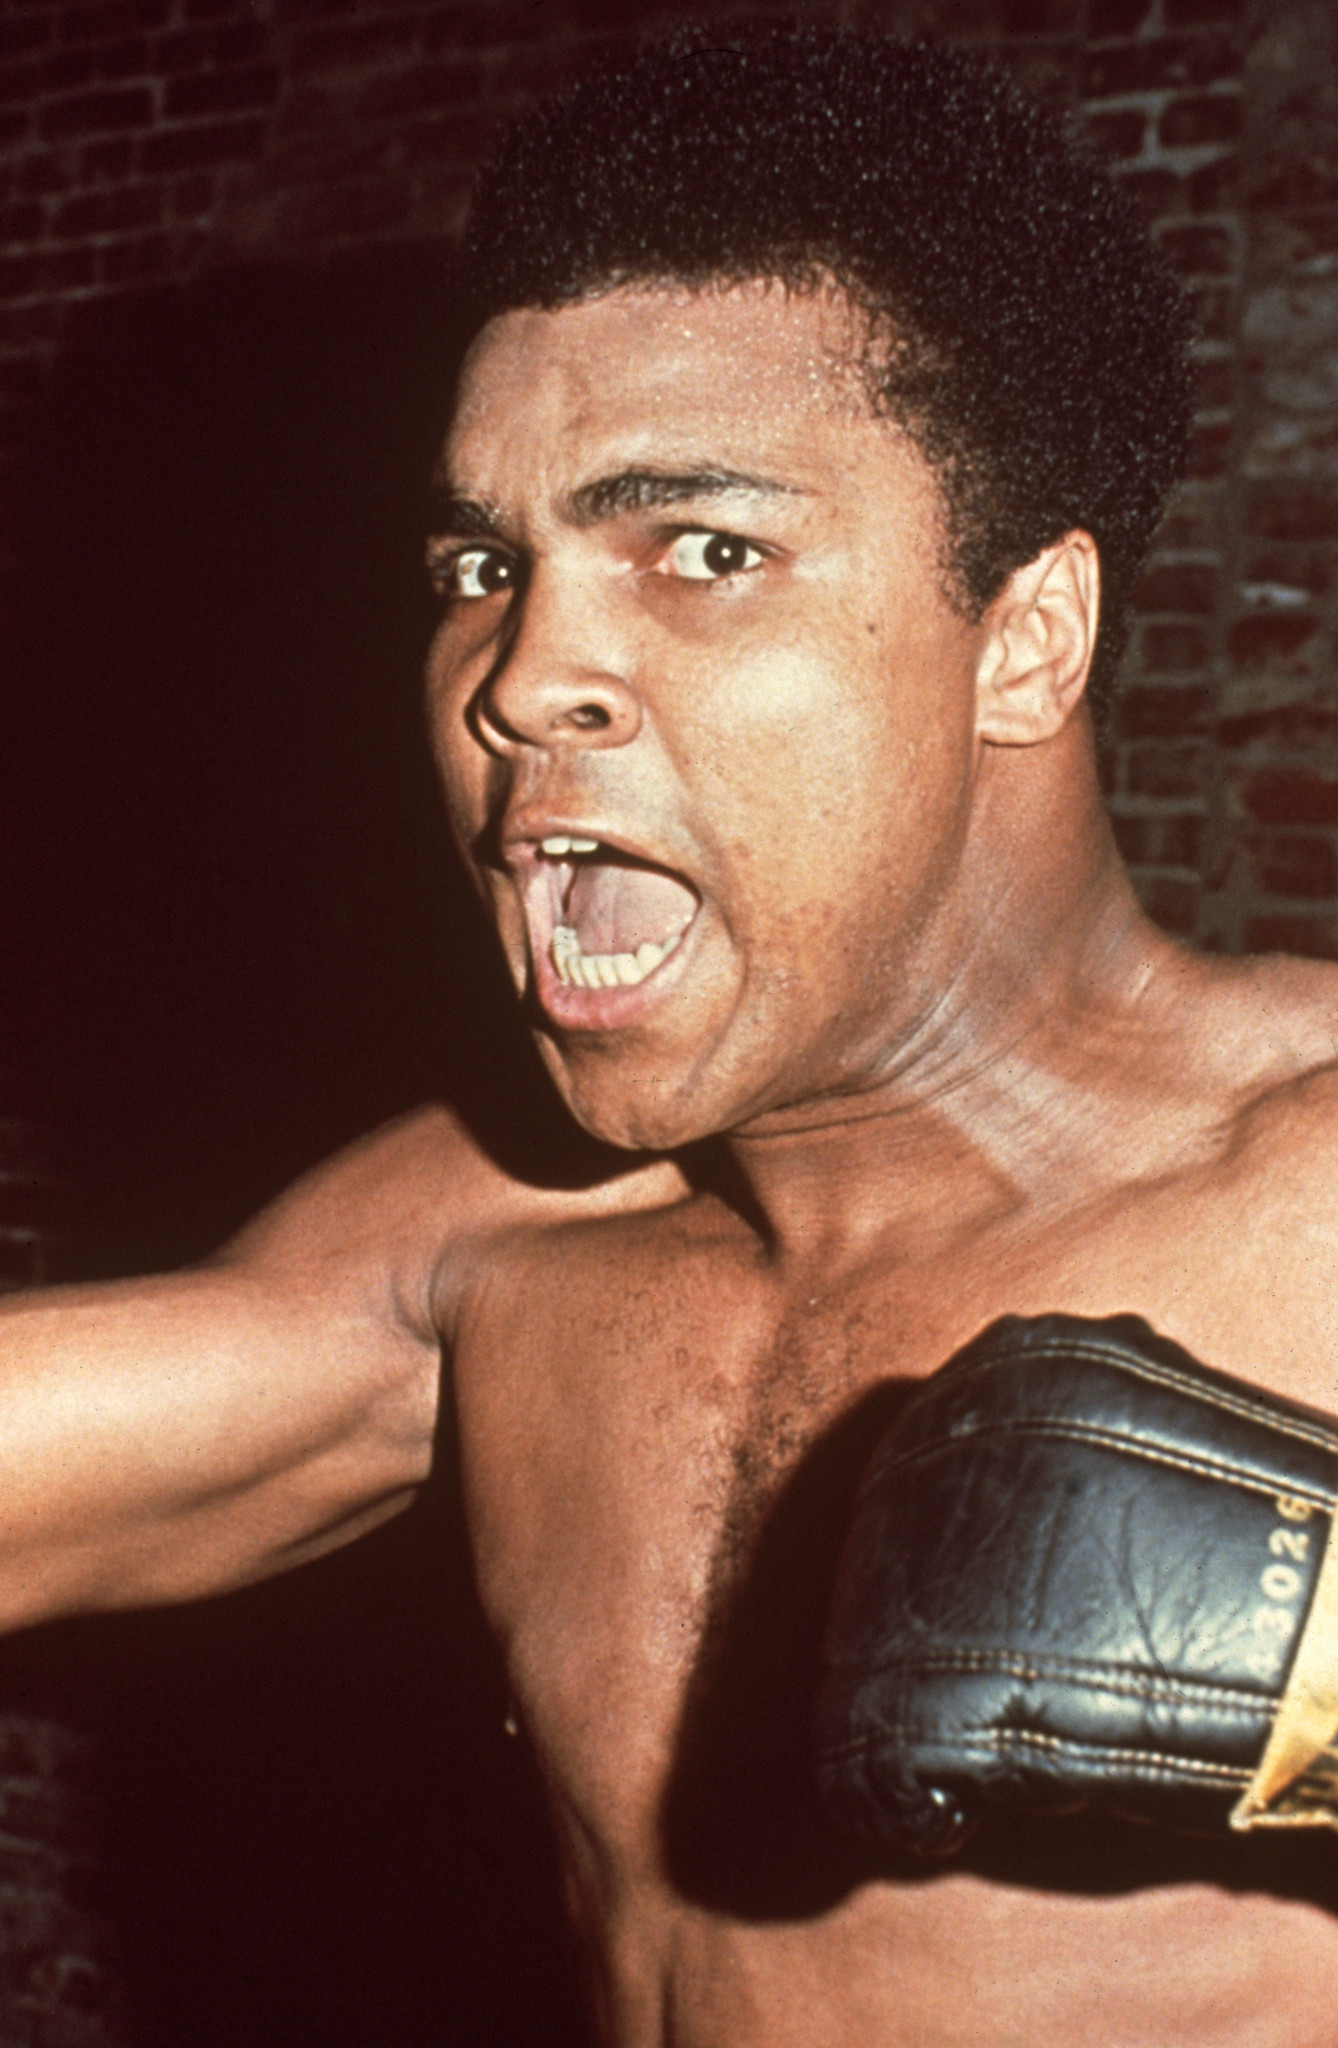 Muhammad Ali's fame transcended sport as he became one of the best-known faces in the world ©Getty Images.